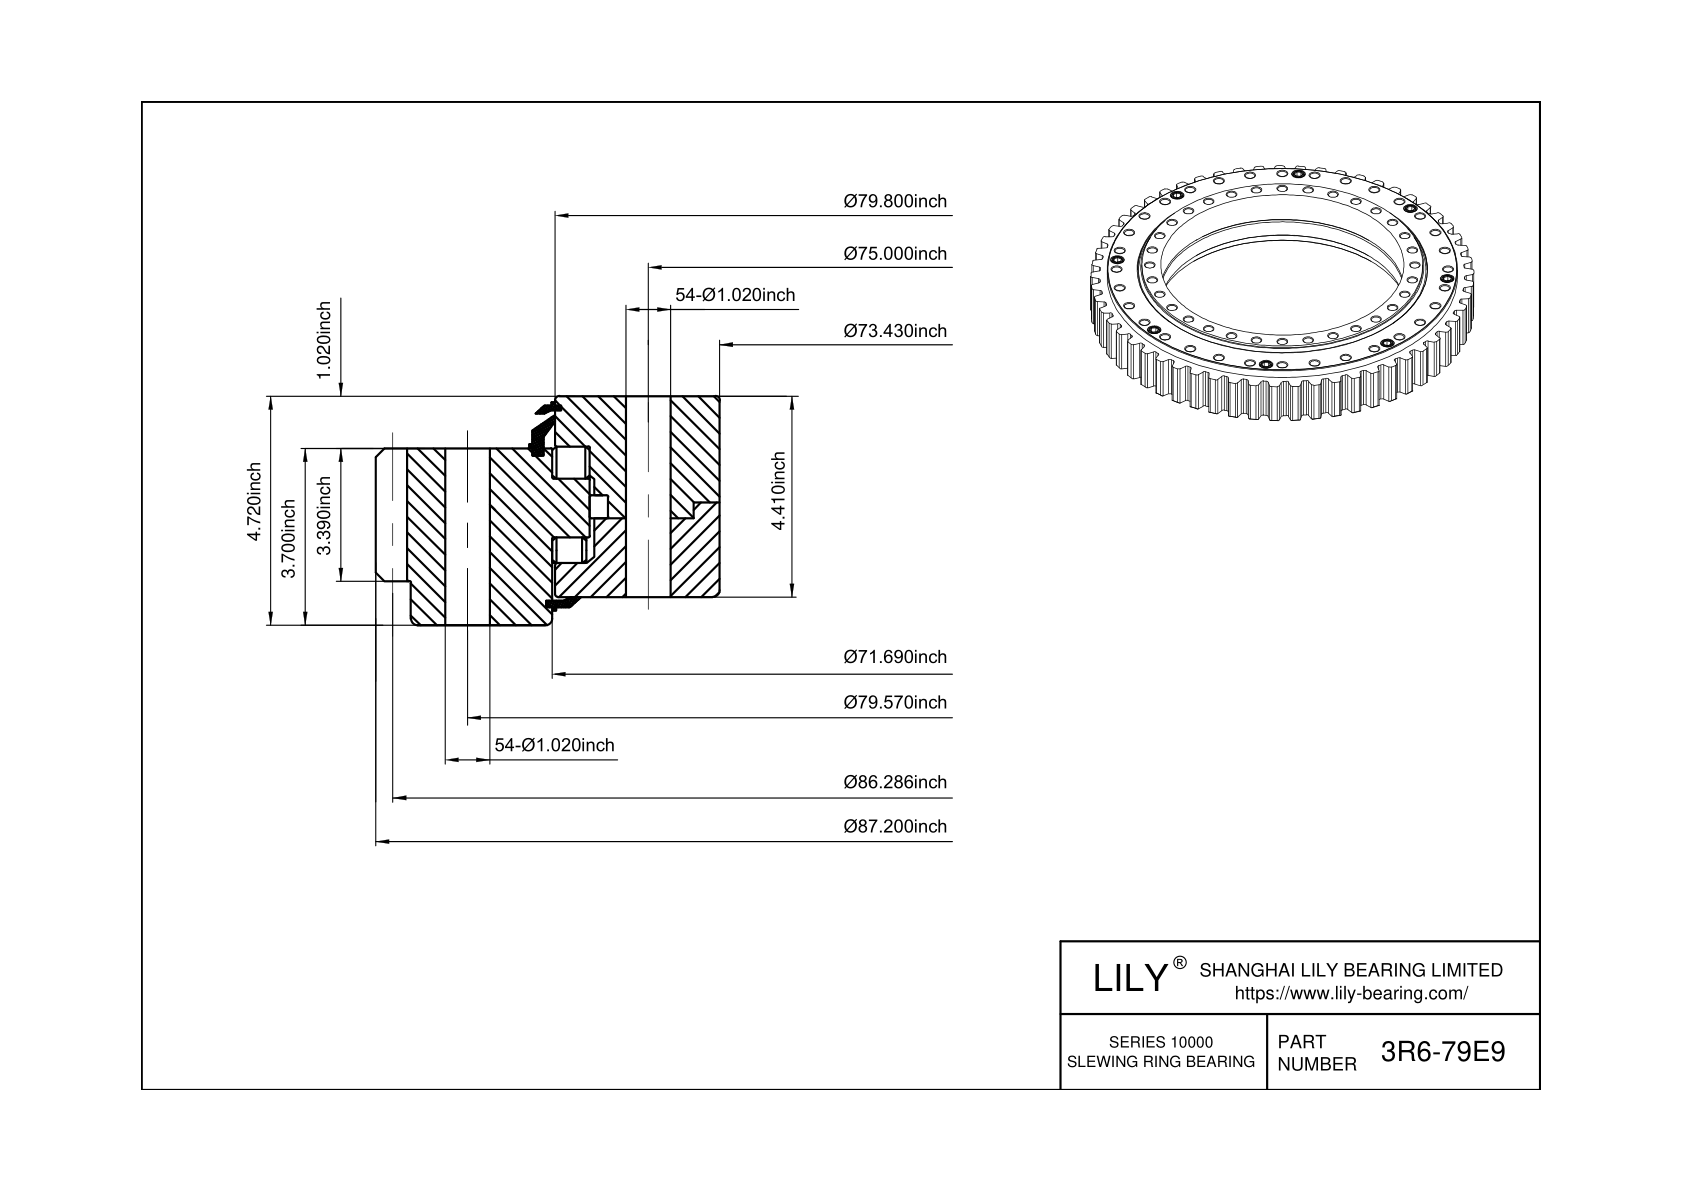 3R6-79E9 Three-Row Cross Roller Slewing Ring Bearing cad drawing